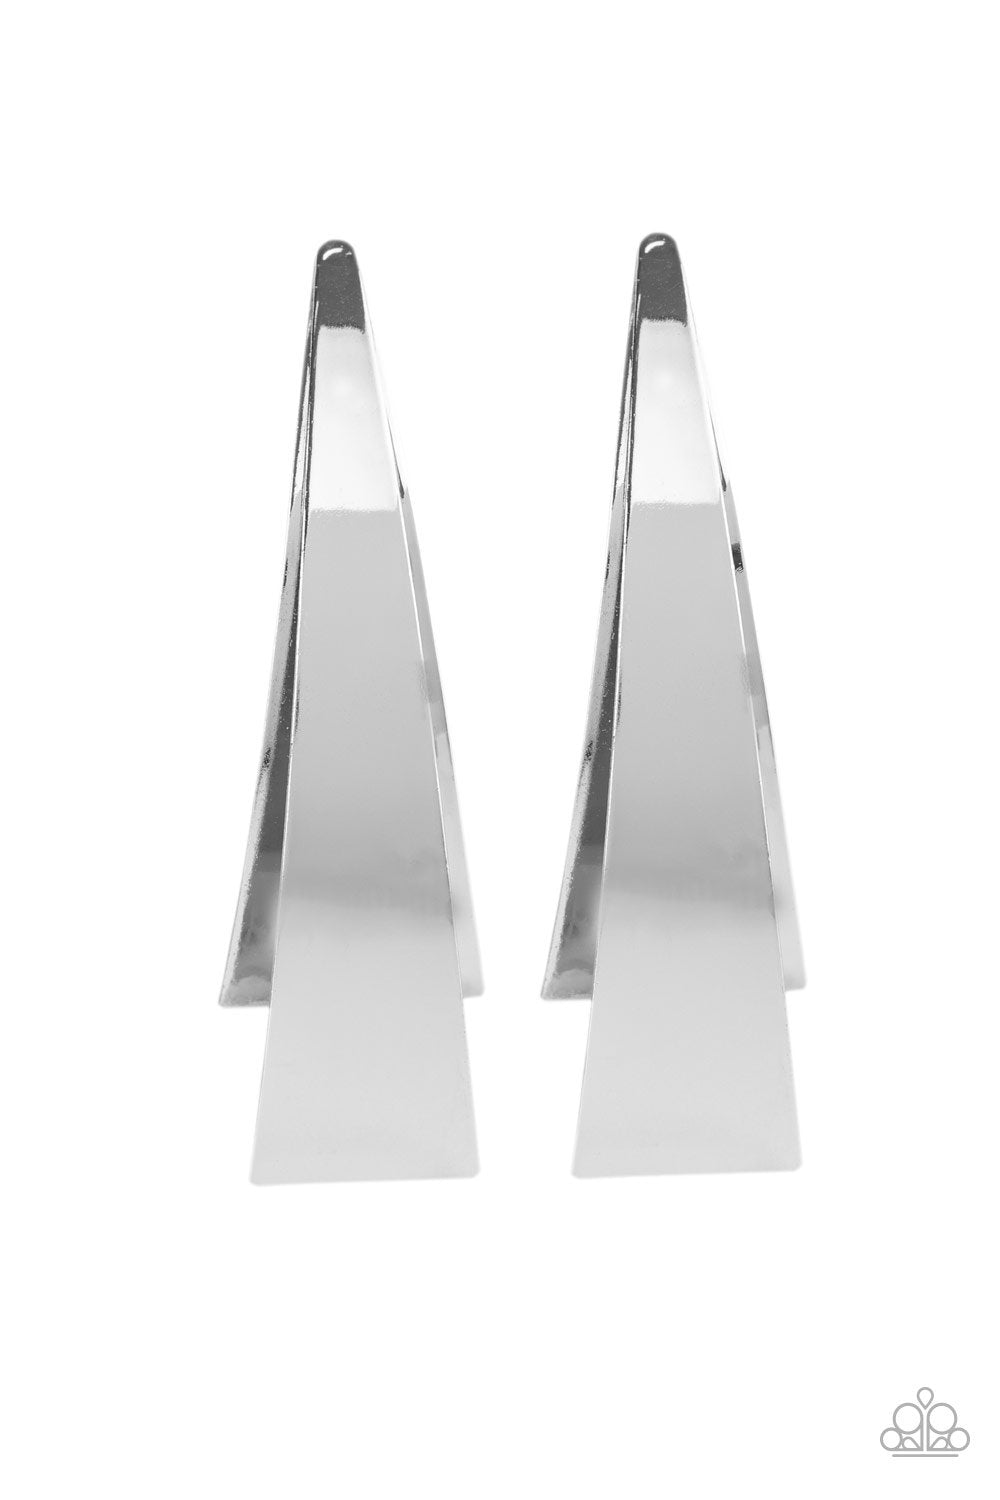 Underestimated Edge Silver Post Earrings - Paparazzi Accessories-CarasShop.com - $5 Jewelry by Cara Jewels